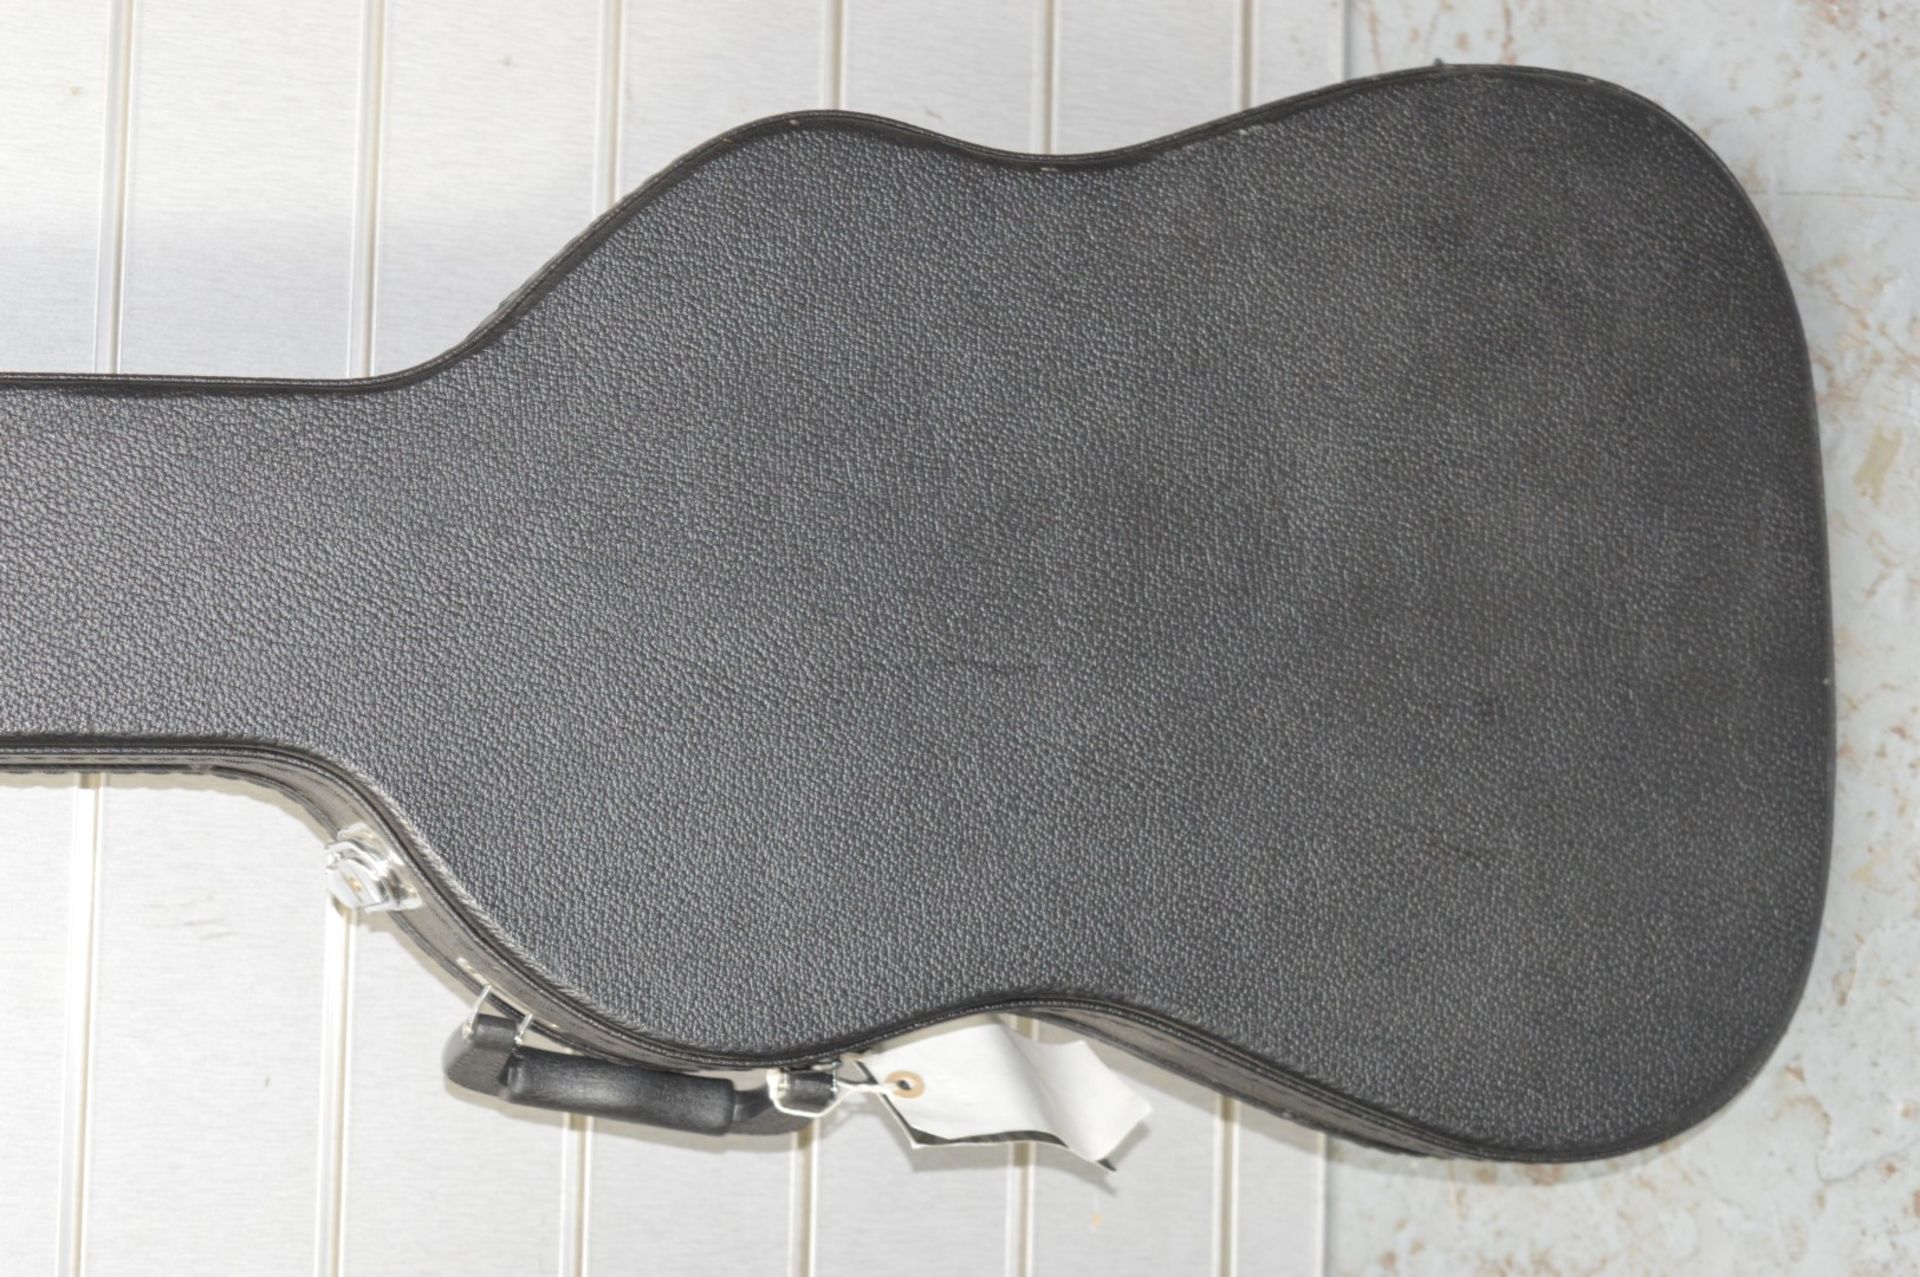 1 x Stagg Basic Electric Hardshell Shaped Guitar Case - CL020 - Ref Pro97 - Location: Altrincham - Image 2 of 8